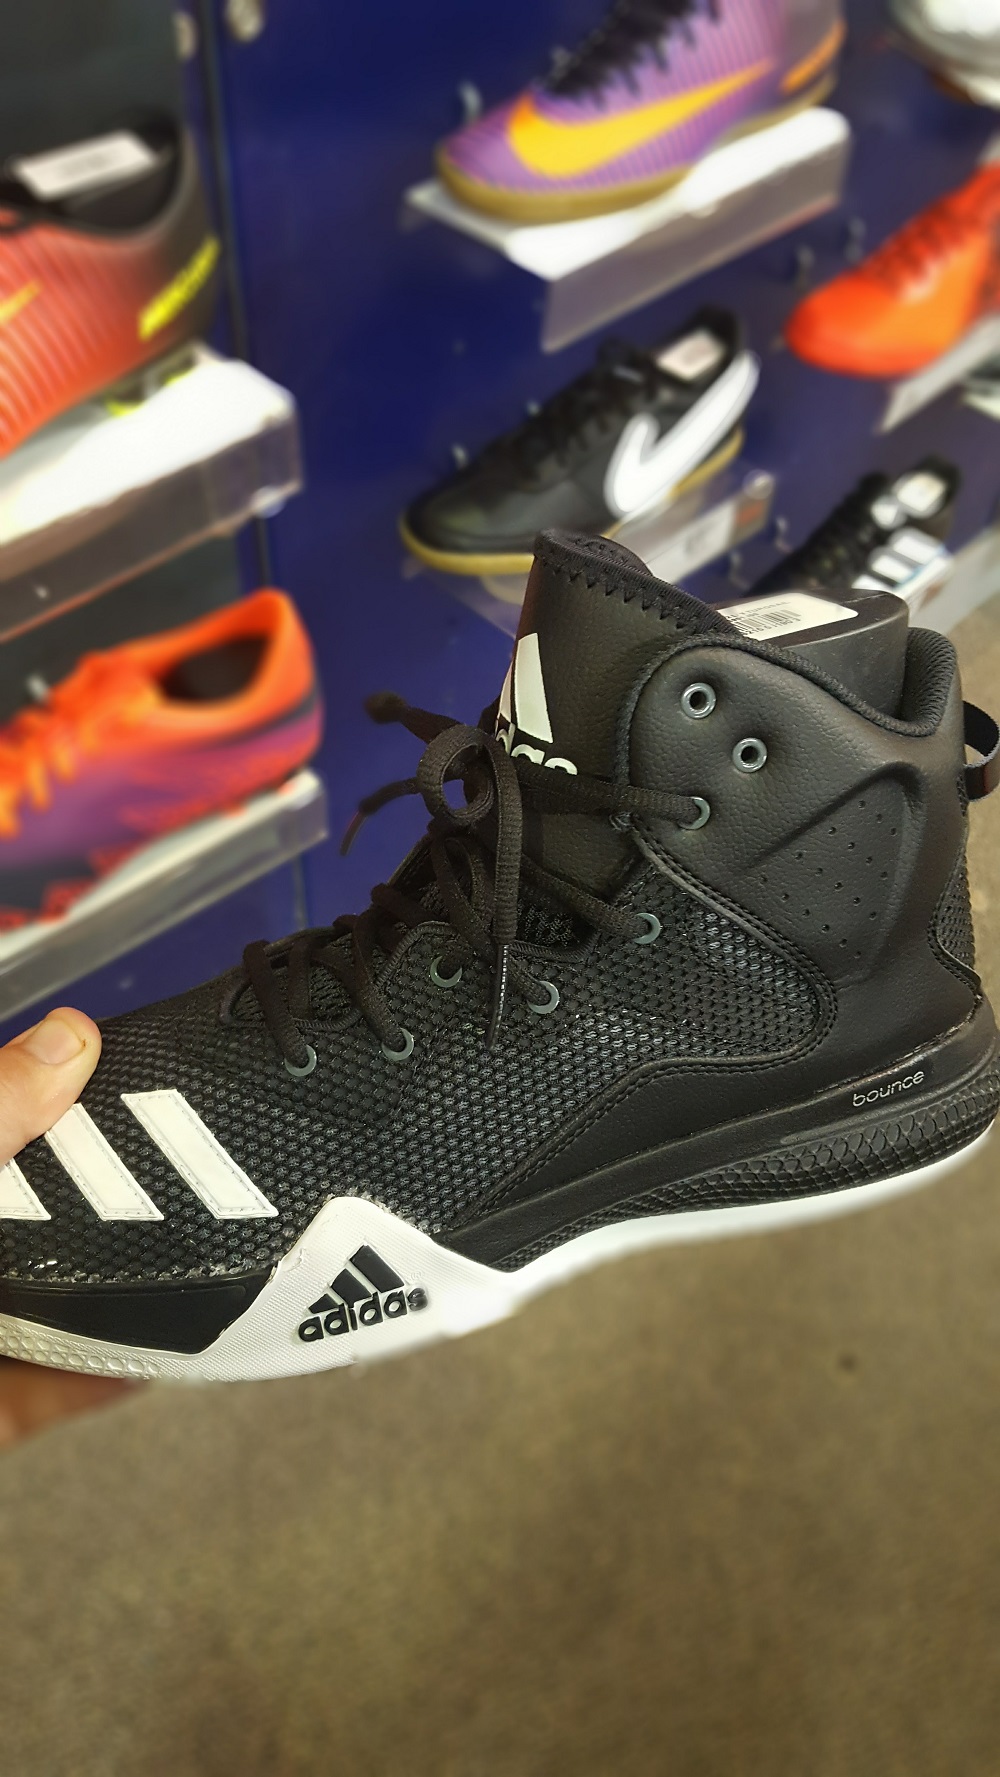 First Look at the adidas Dual Threat 